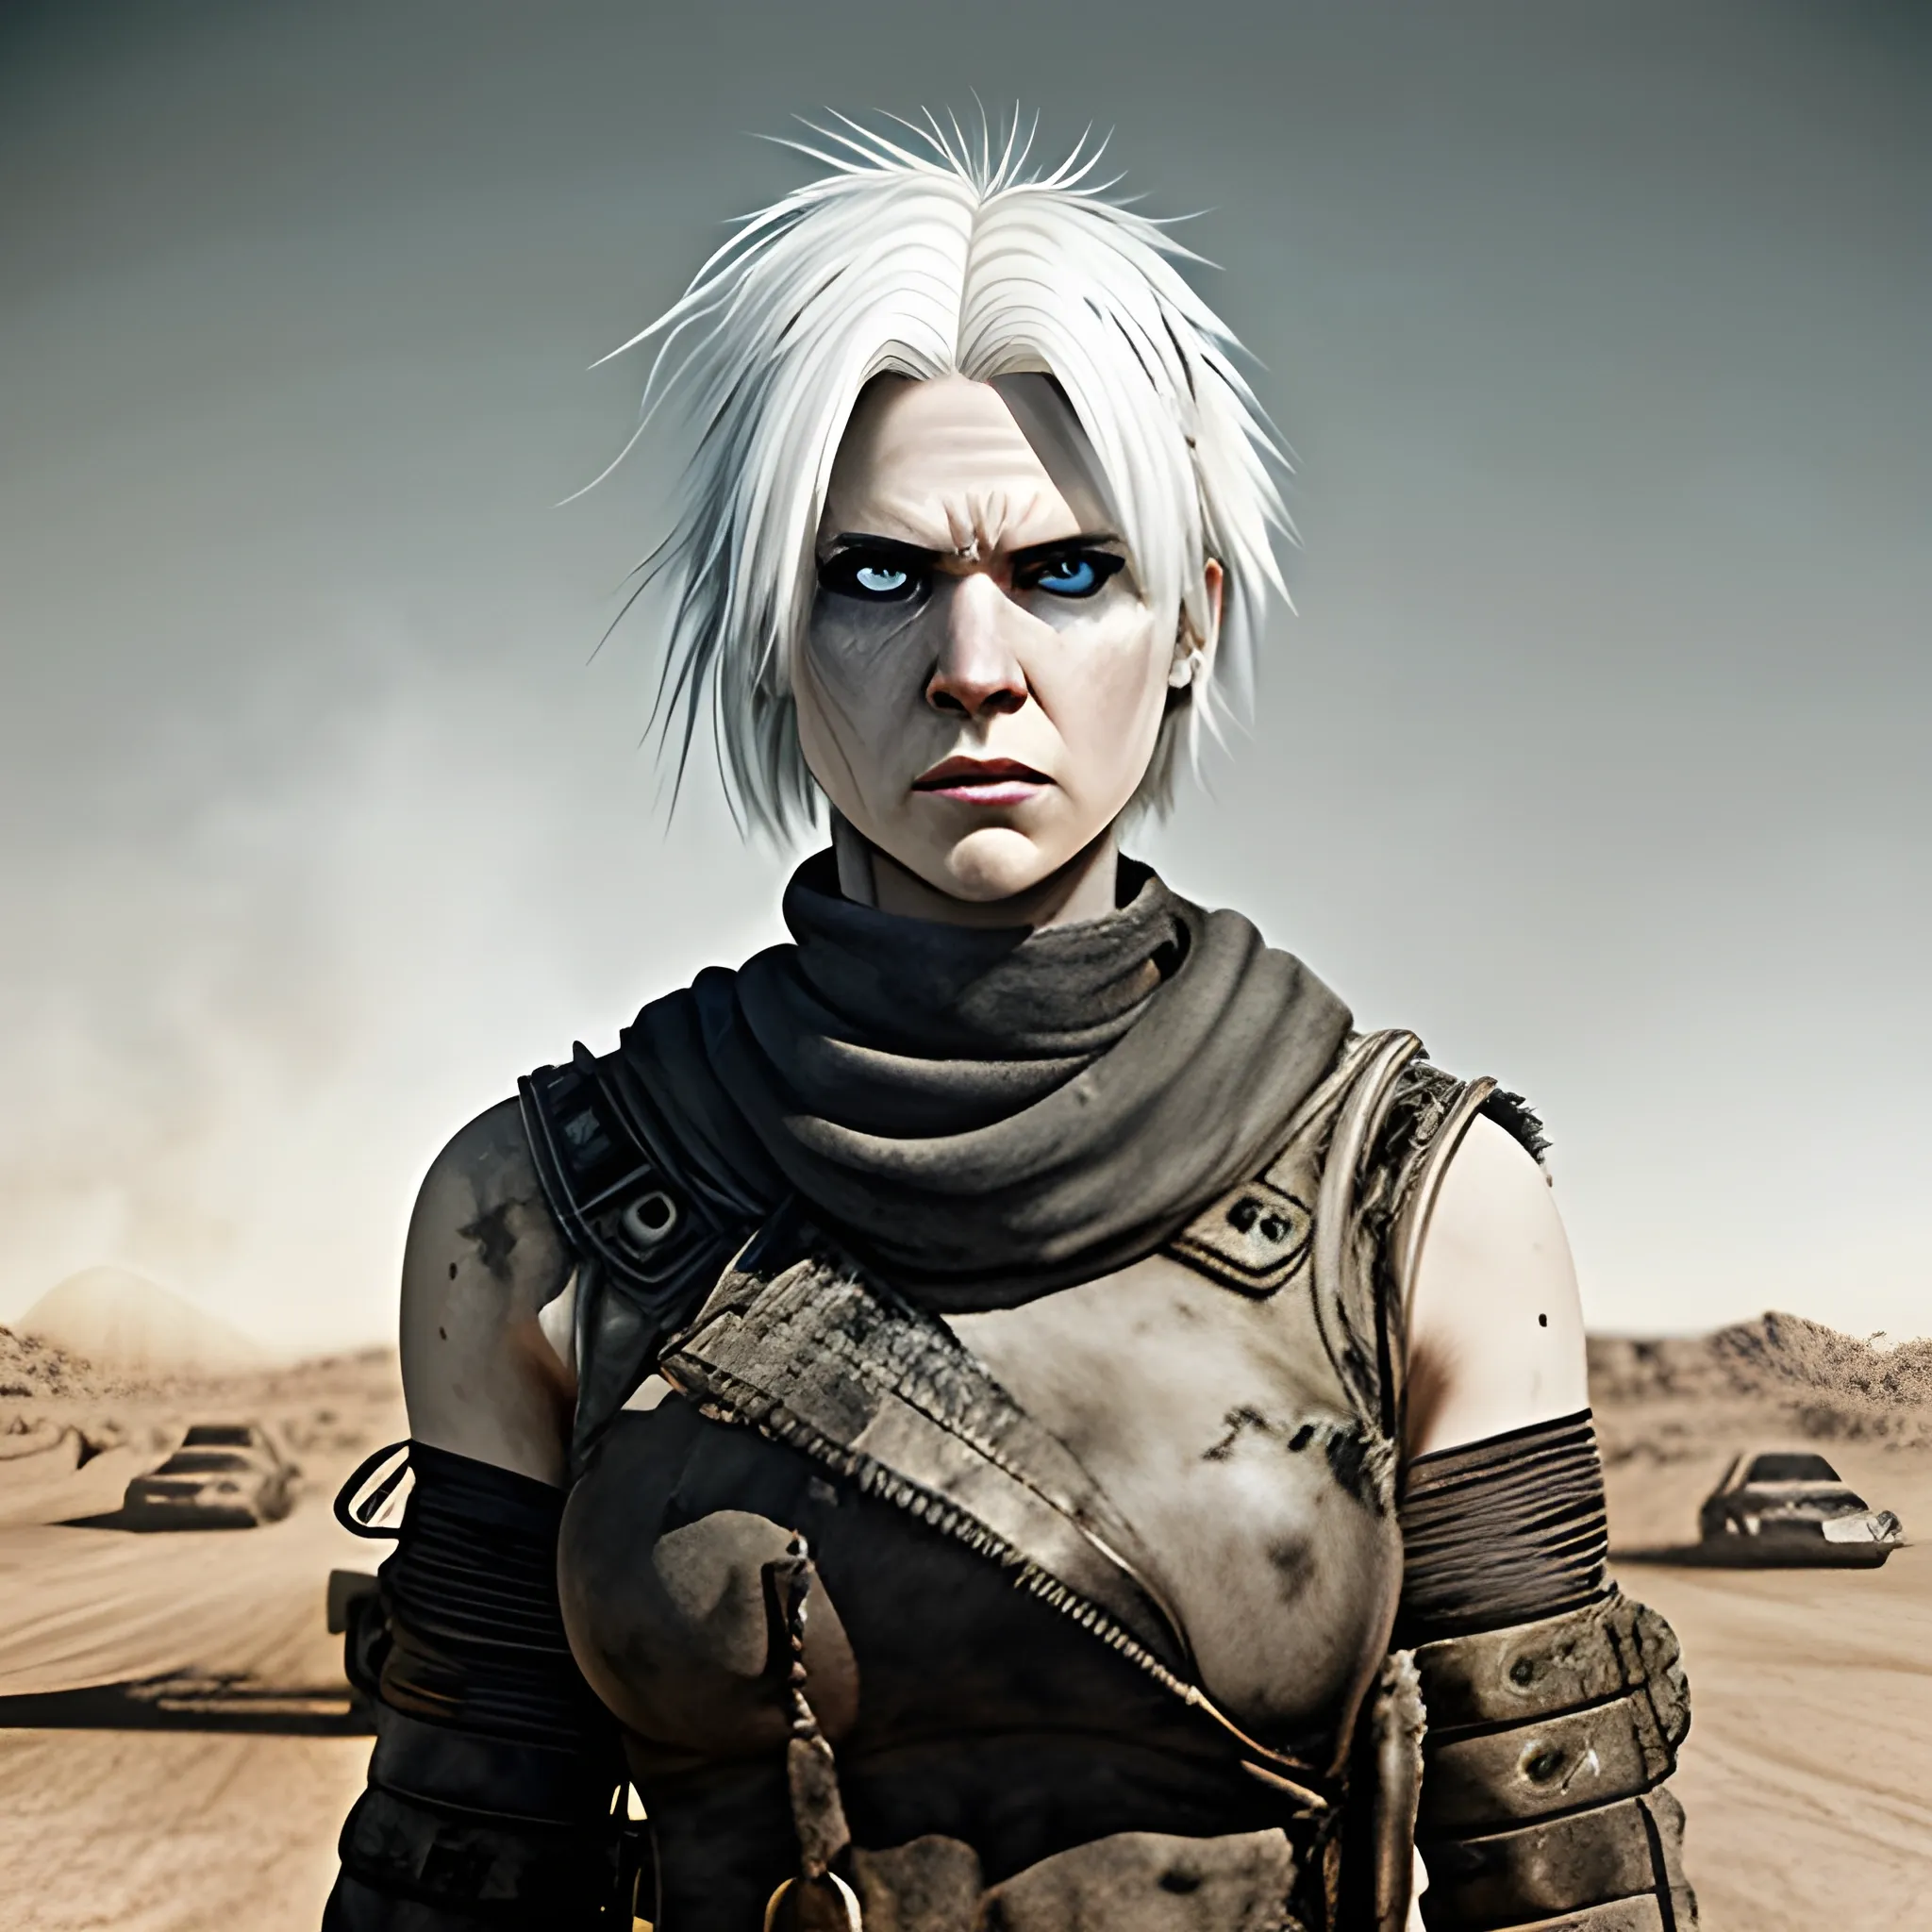 White hair female in mad max style wasteland